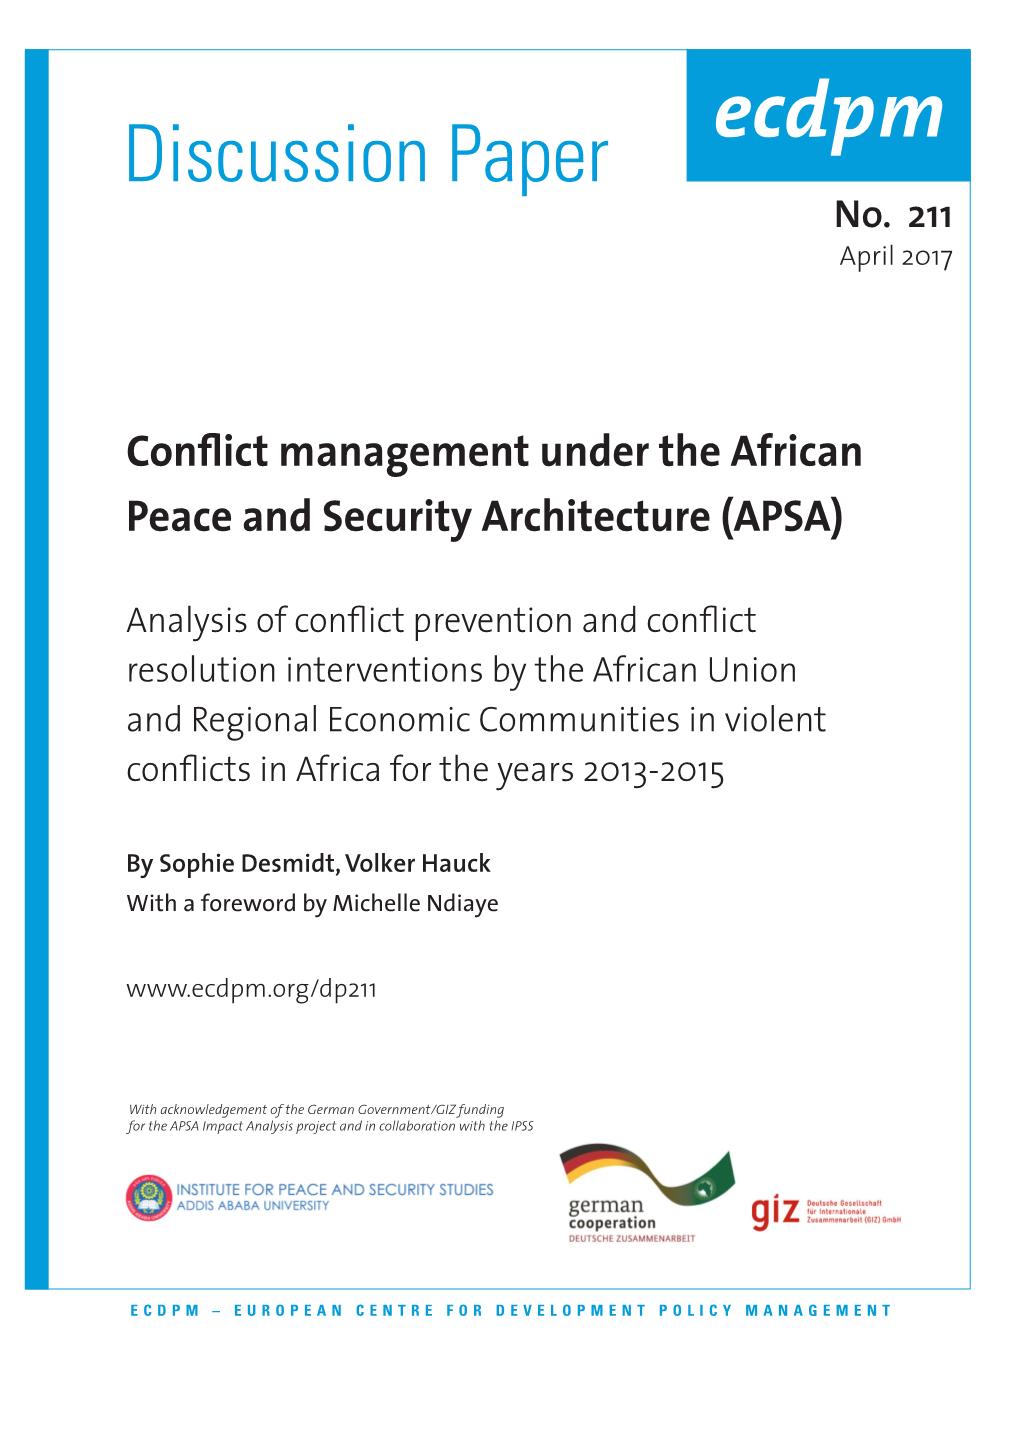 Conflict Management Under the African Peace and Security Architecture